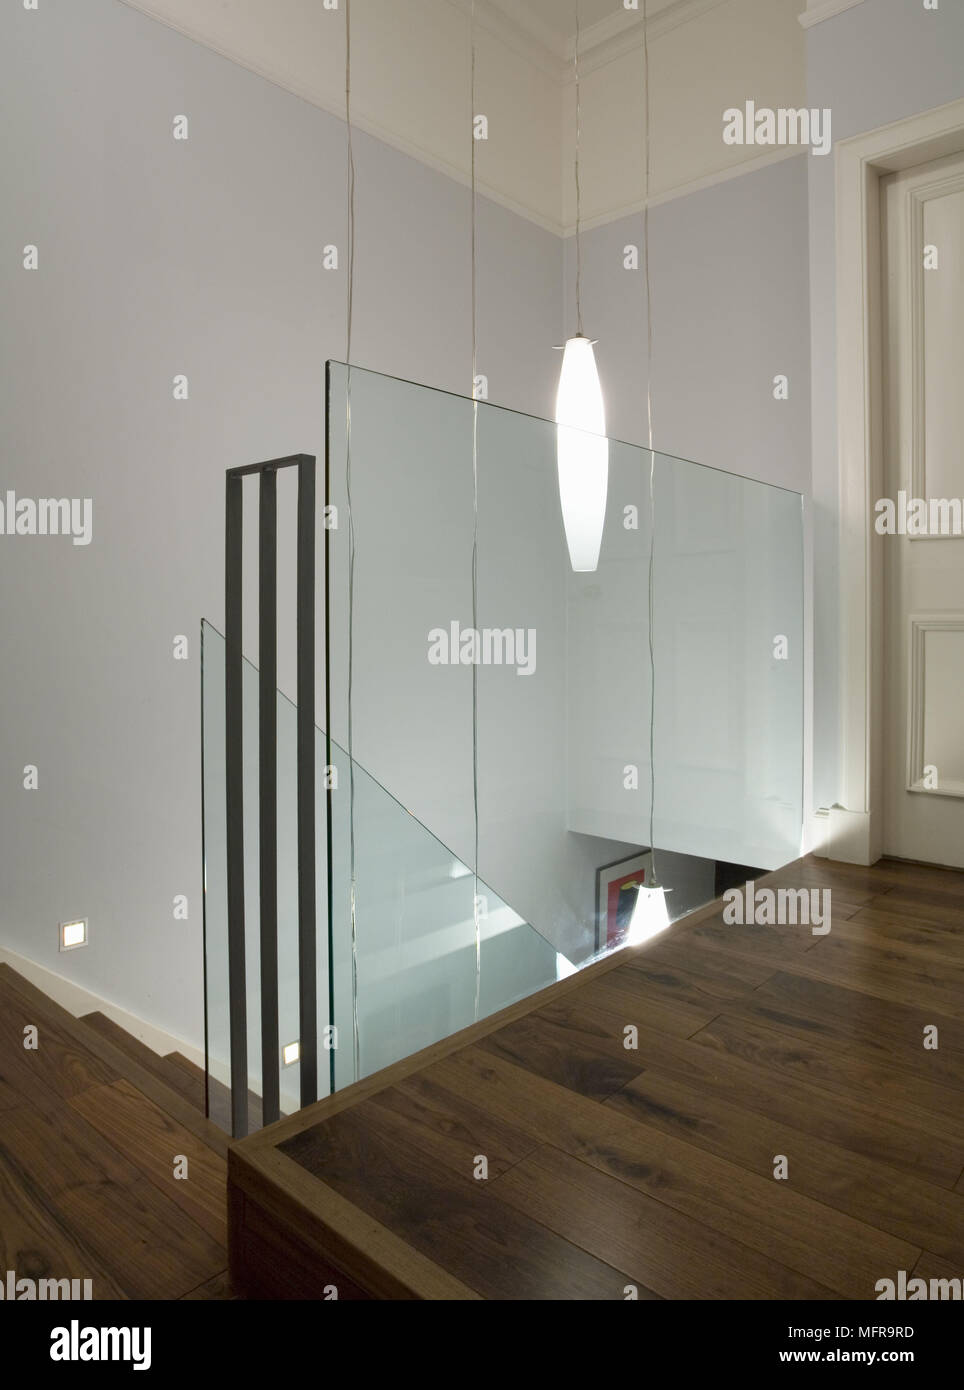 Glass Screen At Top Of Stairs On Landing With Wooden Floor Stock